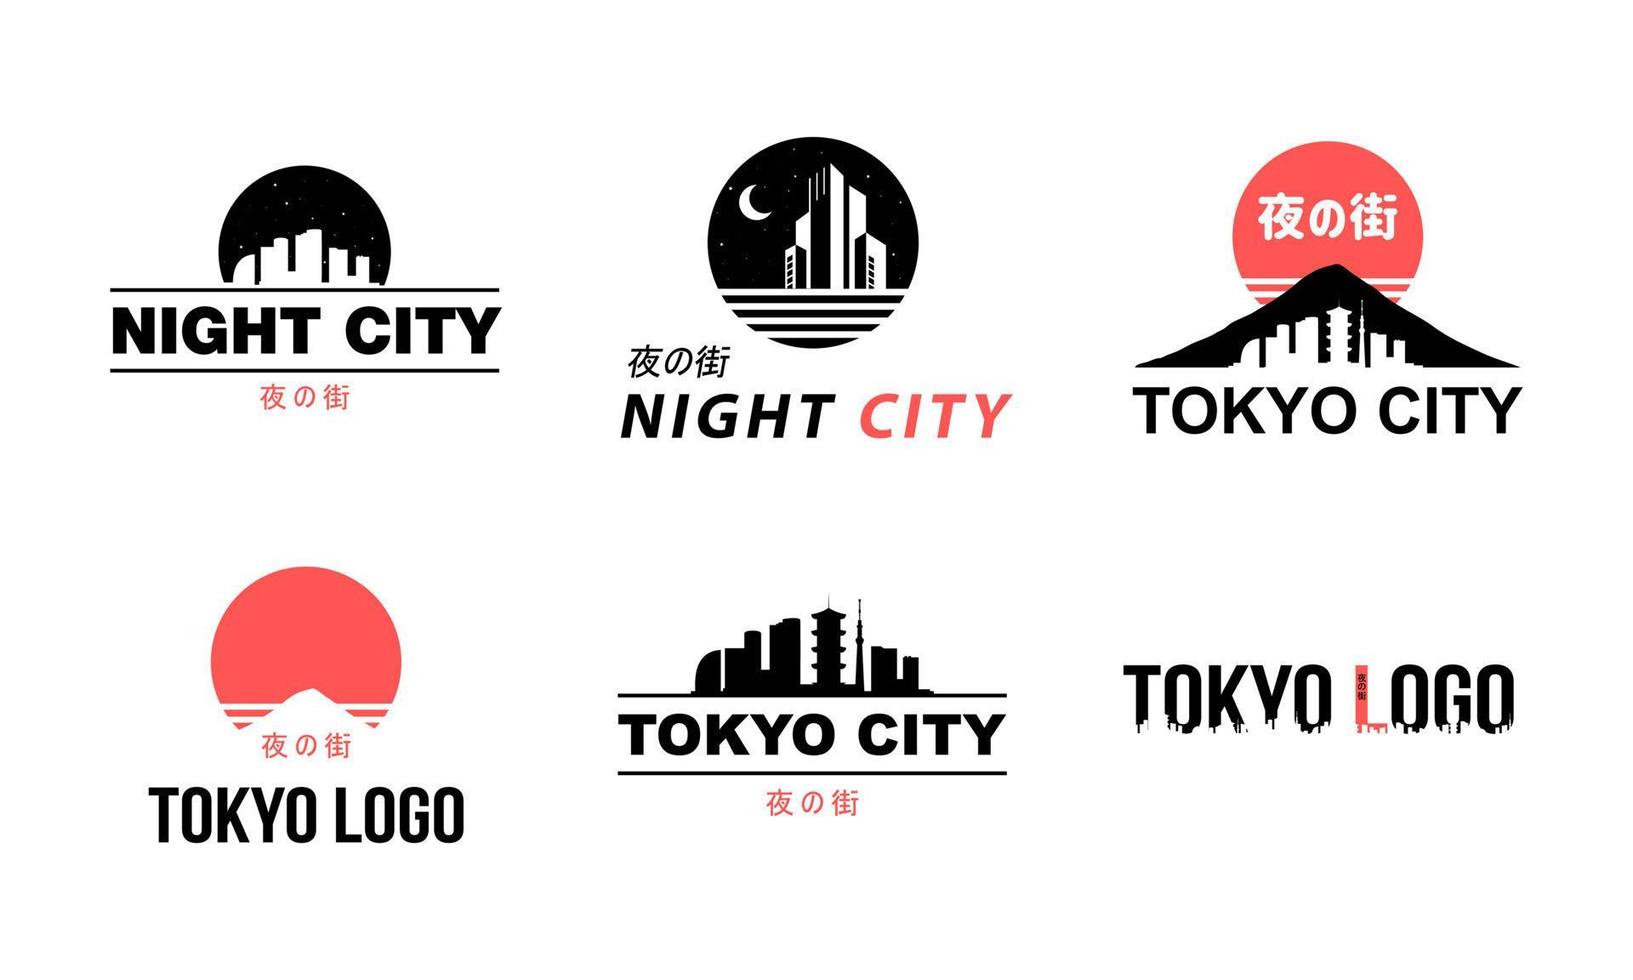 Collection of logos in oriental style. Tokyo CIty in japanese alphabet. Japanese set of vector graphics. Tokyo Night City Design. Japan Cyberpunk Labels.